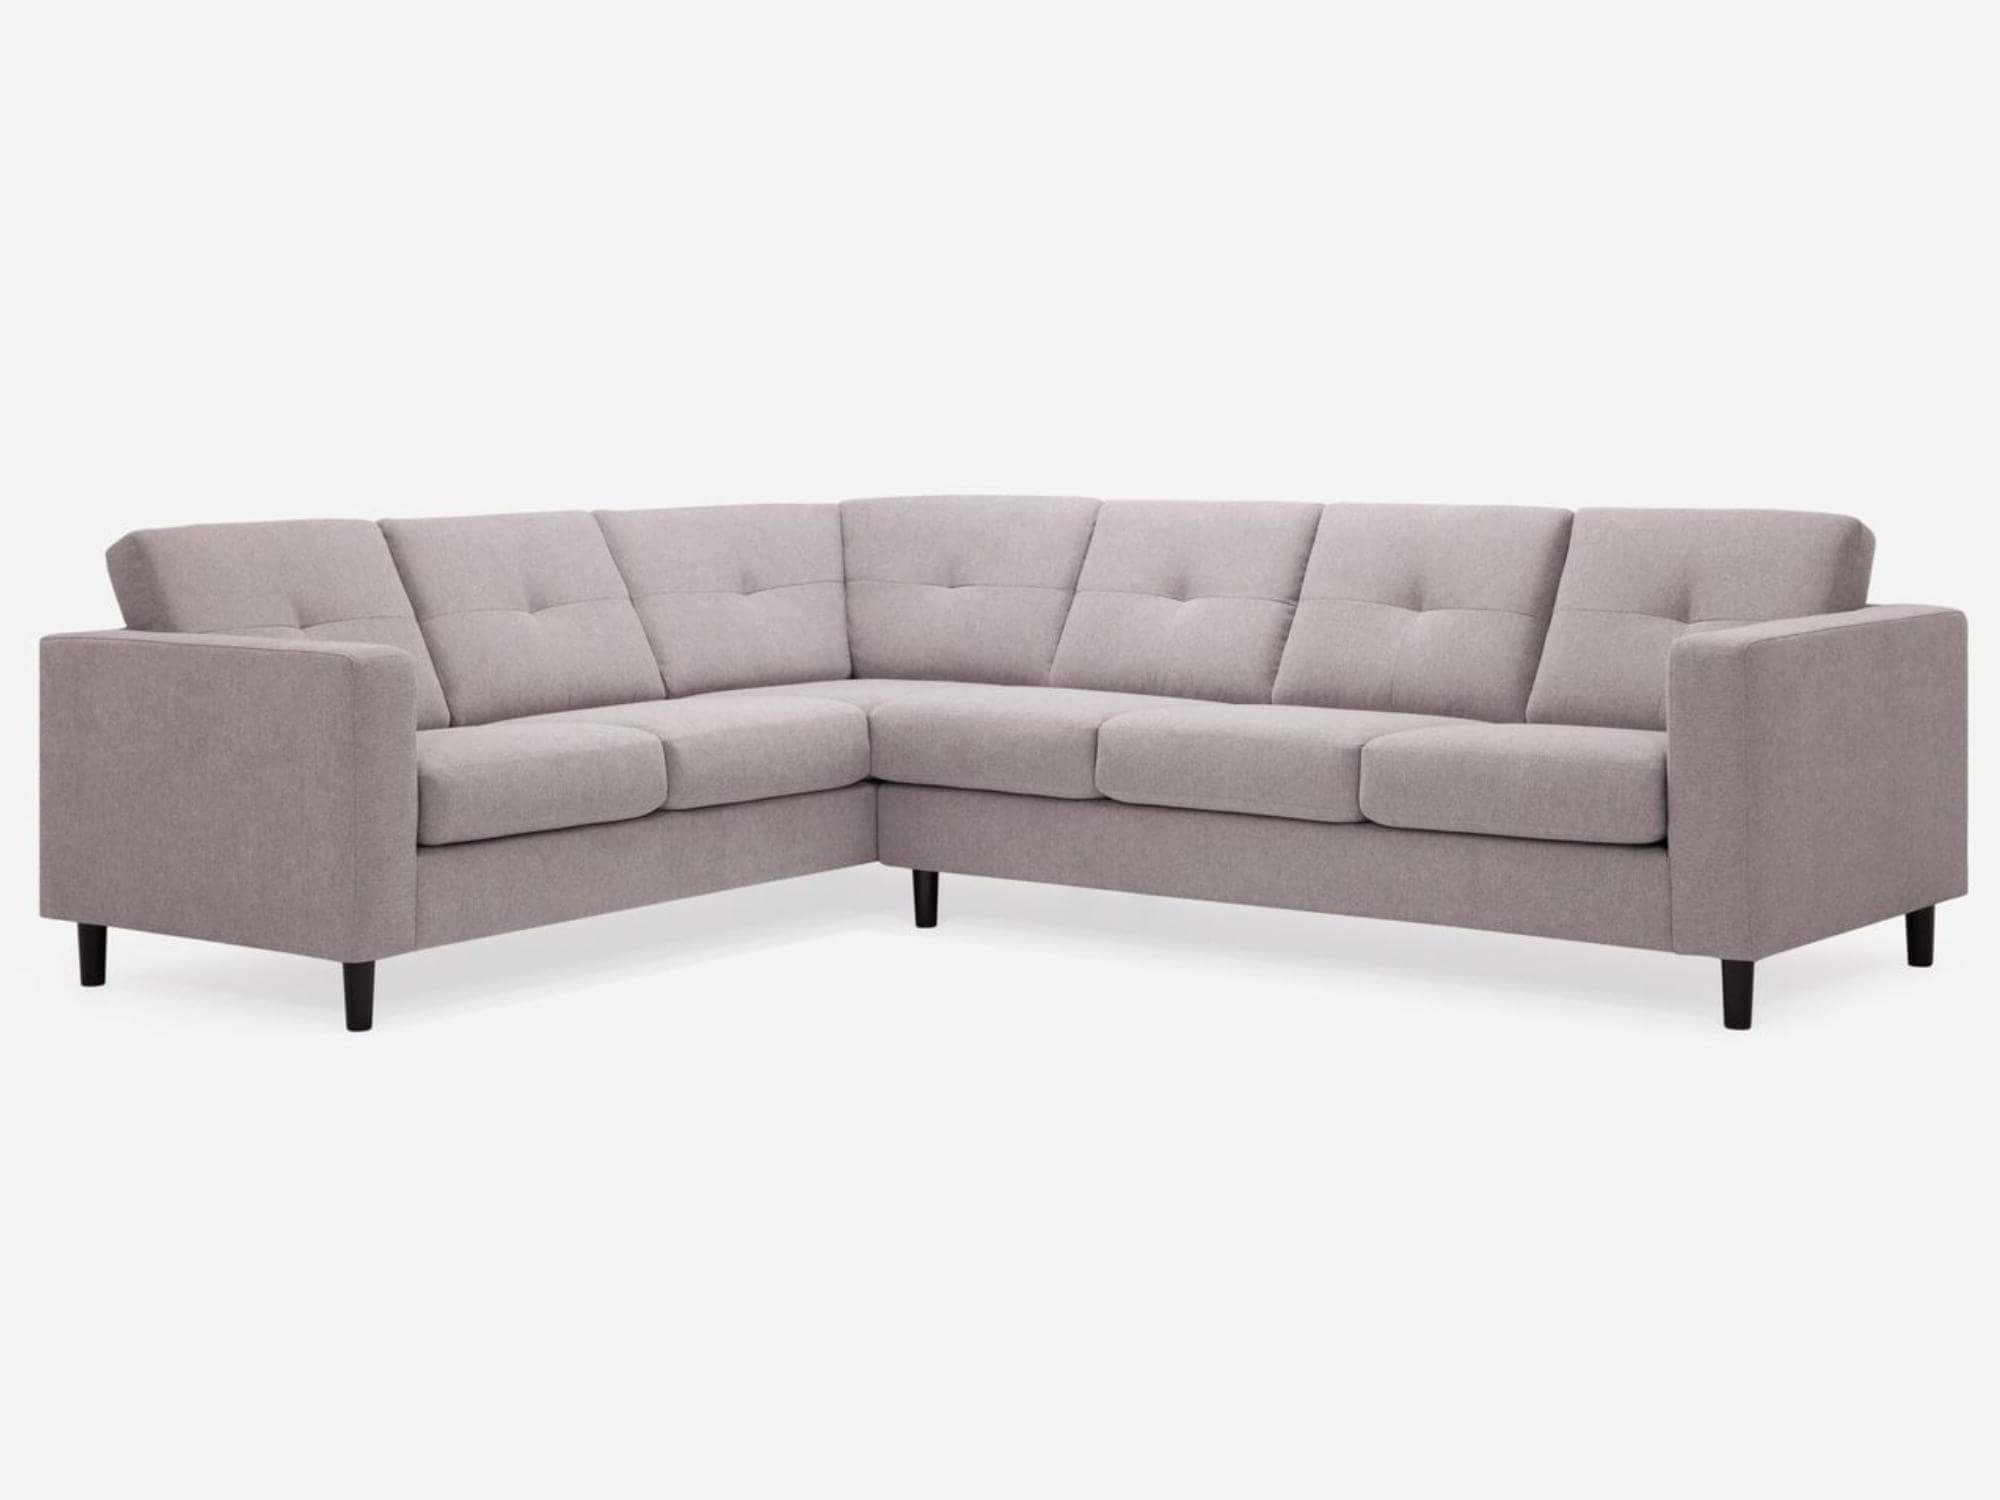 Solo Sectional Sofa | Black Fabric Or Grey Leather Sectional Within 6 Seater Sectional Couches (View 3 of 20)